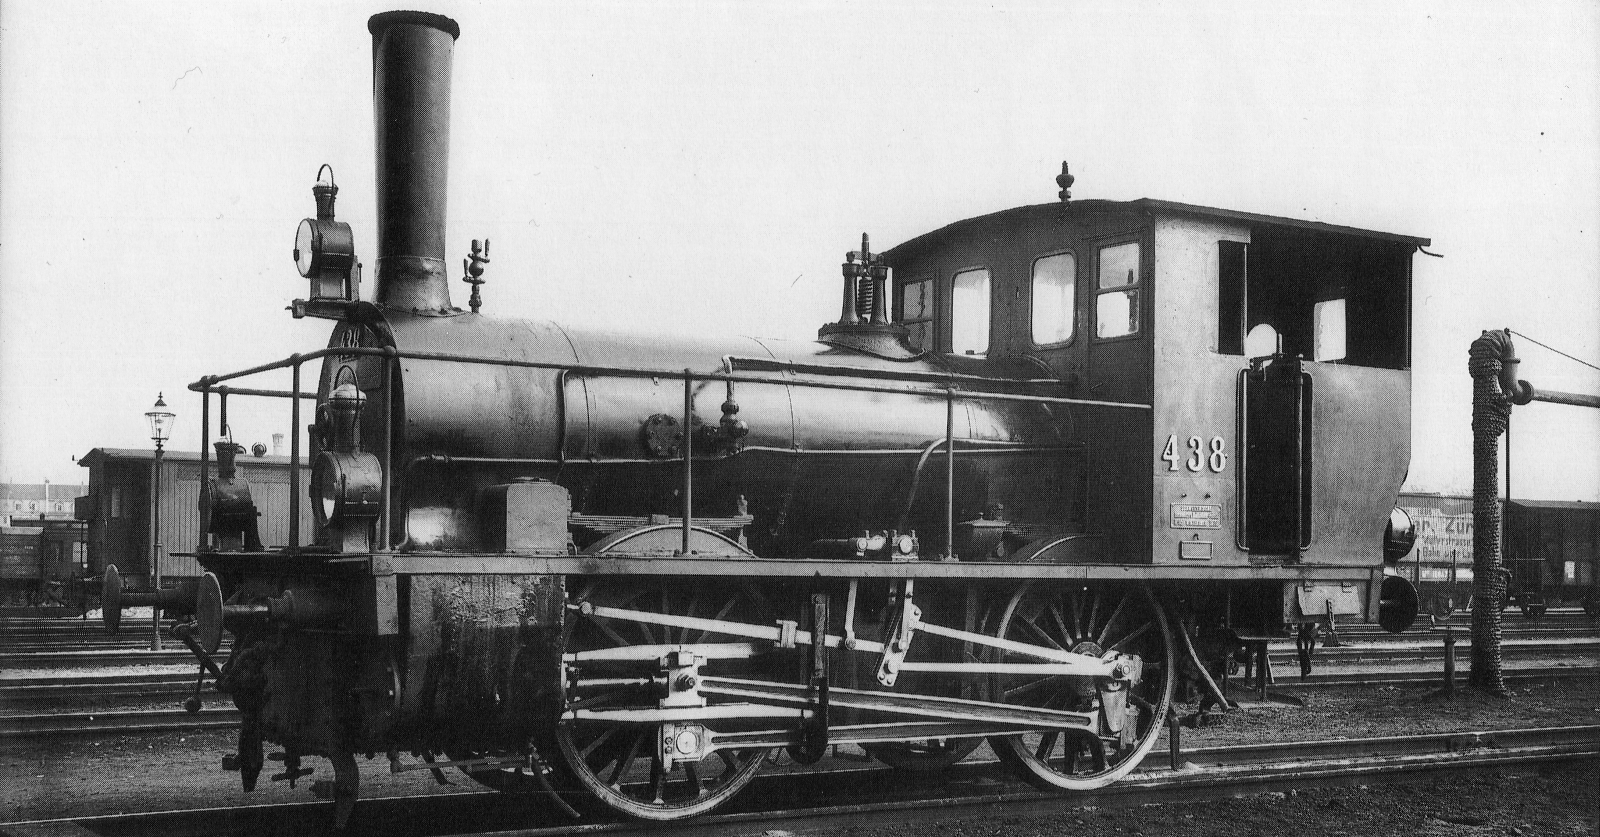 No. 438 in the year 1902